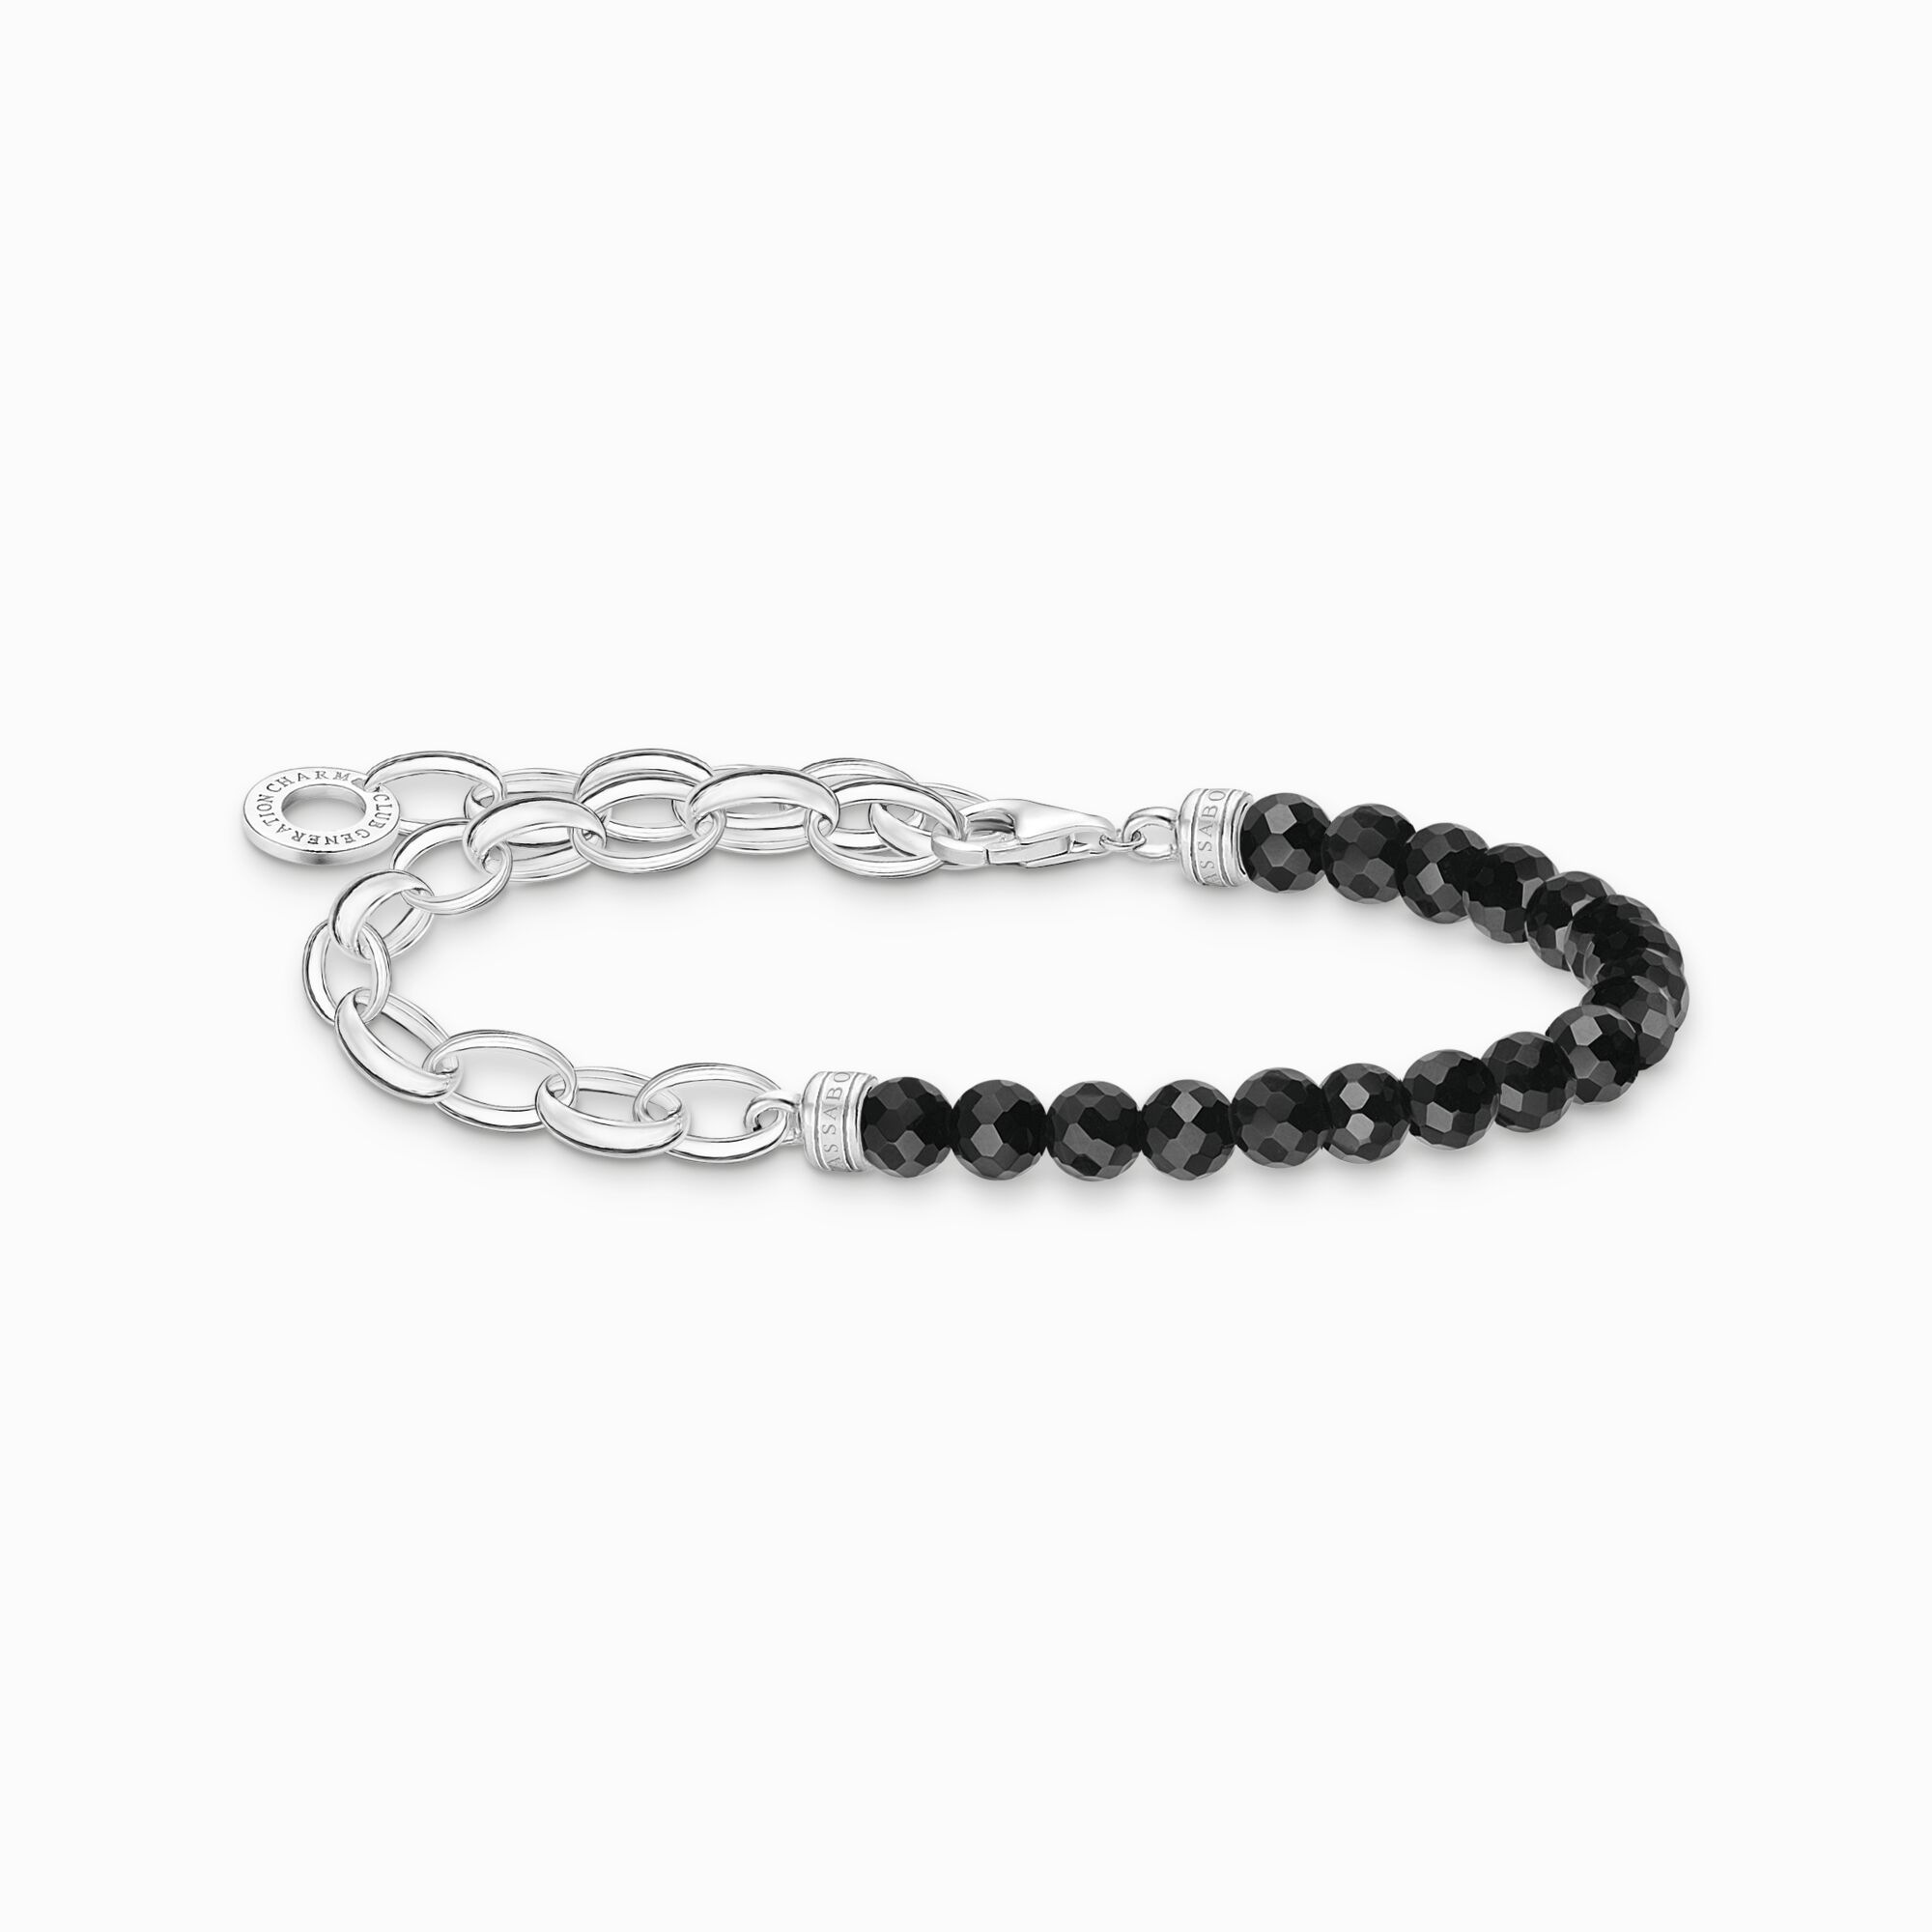 expedition Chaise longue Dizziness Charm bracelet, beads of onyx & silver | THOMAS SABO